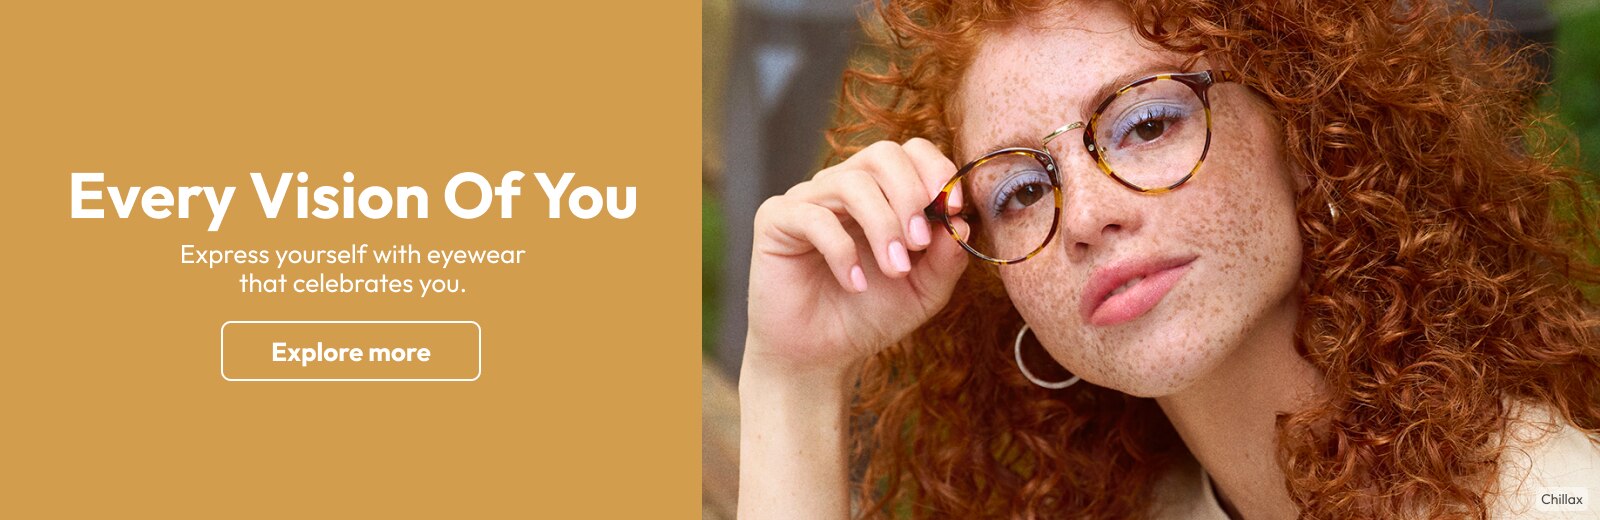 Express yourself with eyewear that celebrates you.